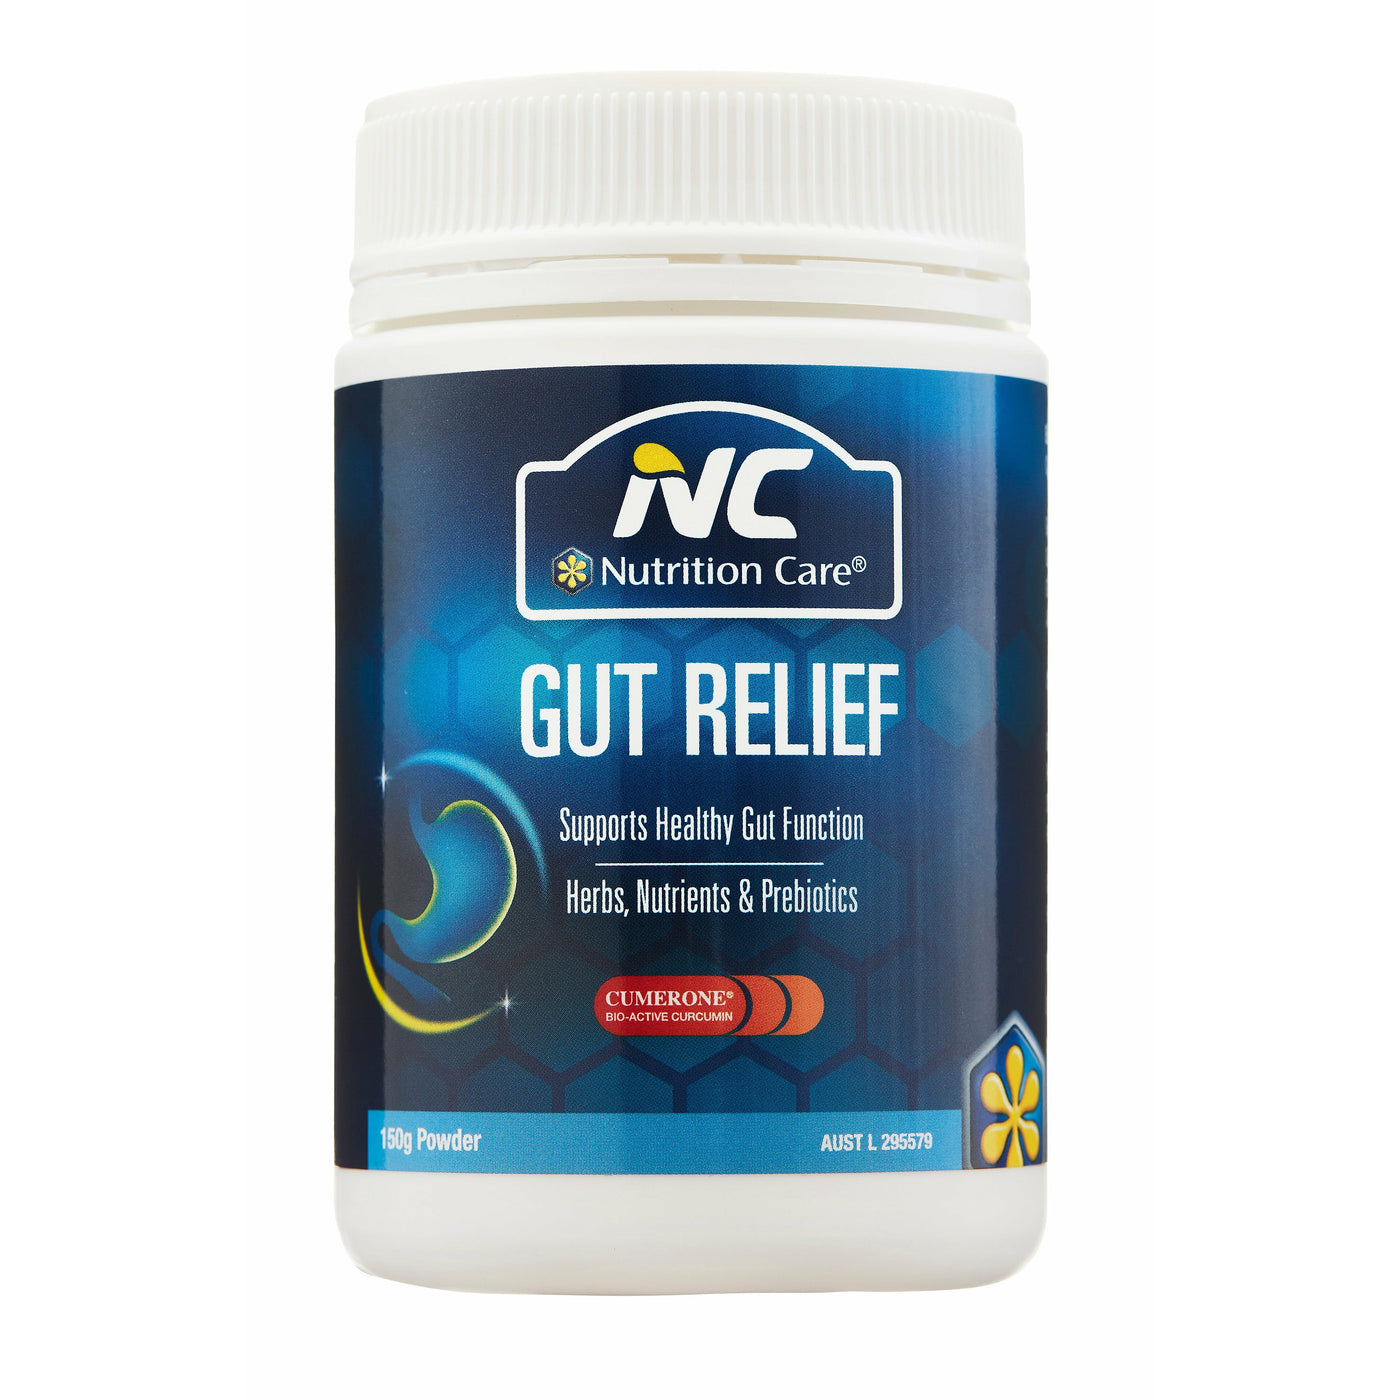 Nutrition Care NC Gut Relief Oral Powder 150g